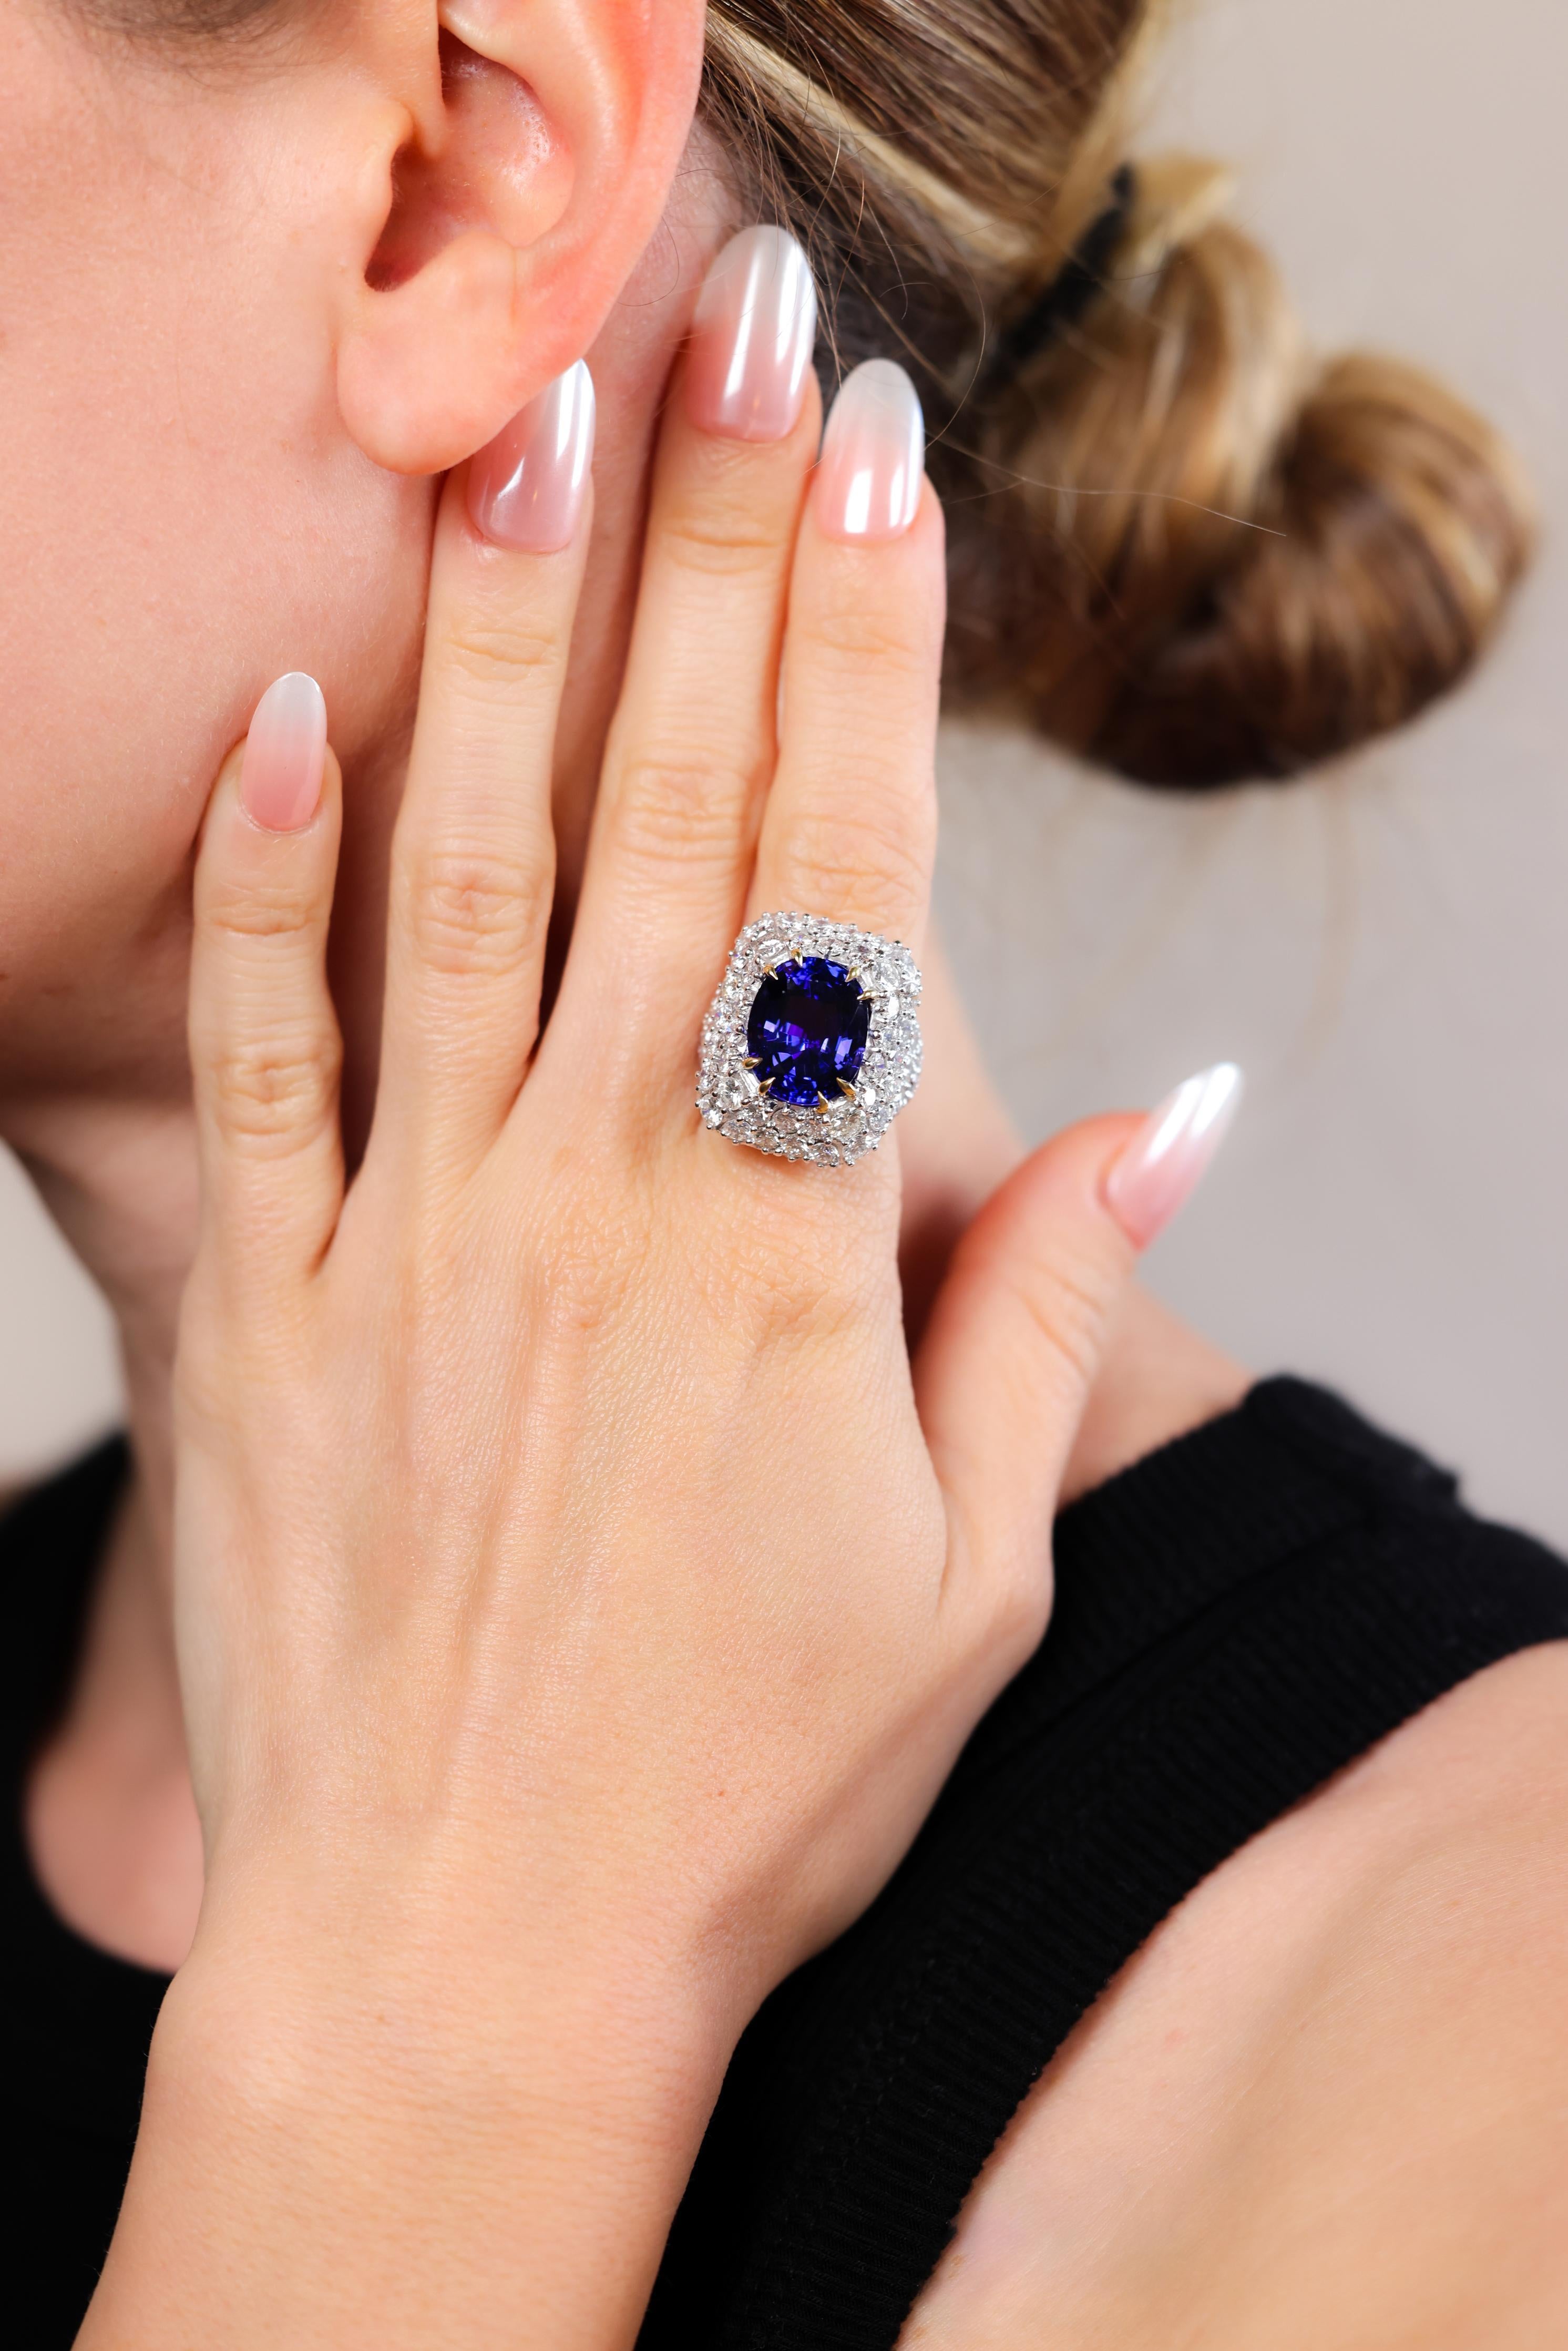 One Vintage Tanzanite Diamond Palladium Ring. Featuring one oval mixed cut tanzanite of 10.54 carats. Accented by numerous round brilliant cut diamonds with a total weight of approximately 6.65 carats, graded near-colorless, VS clarity. Crafted in